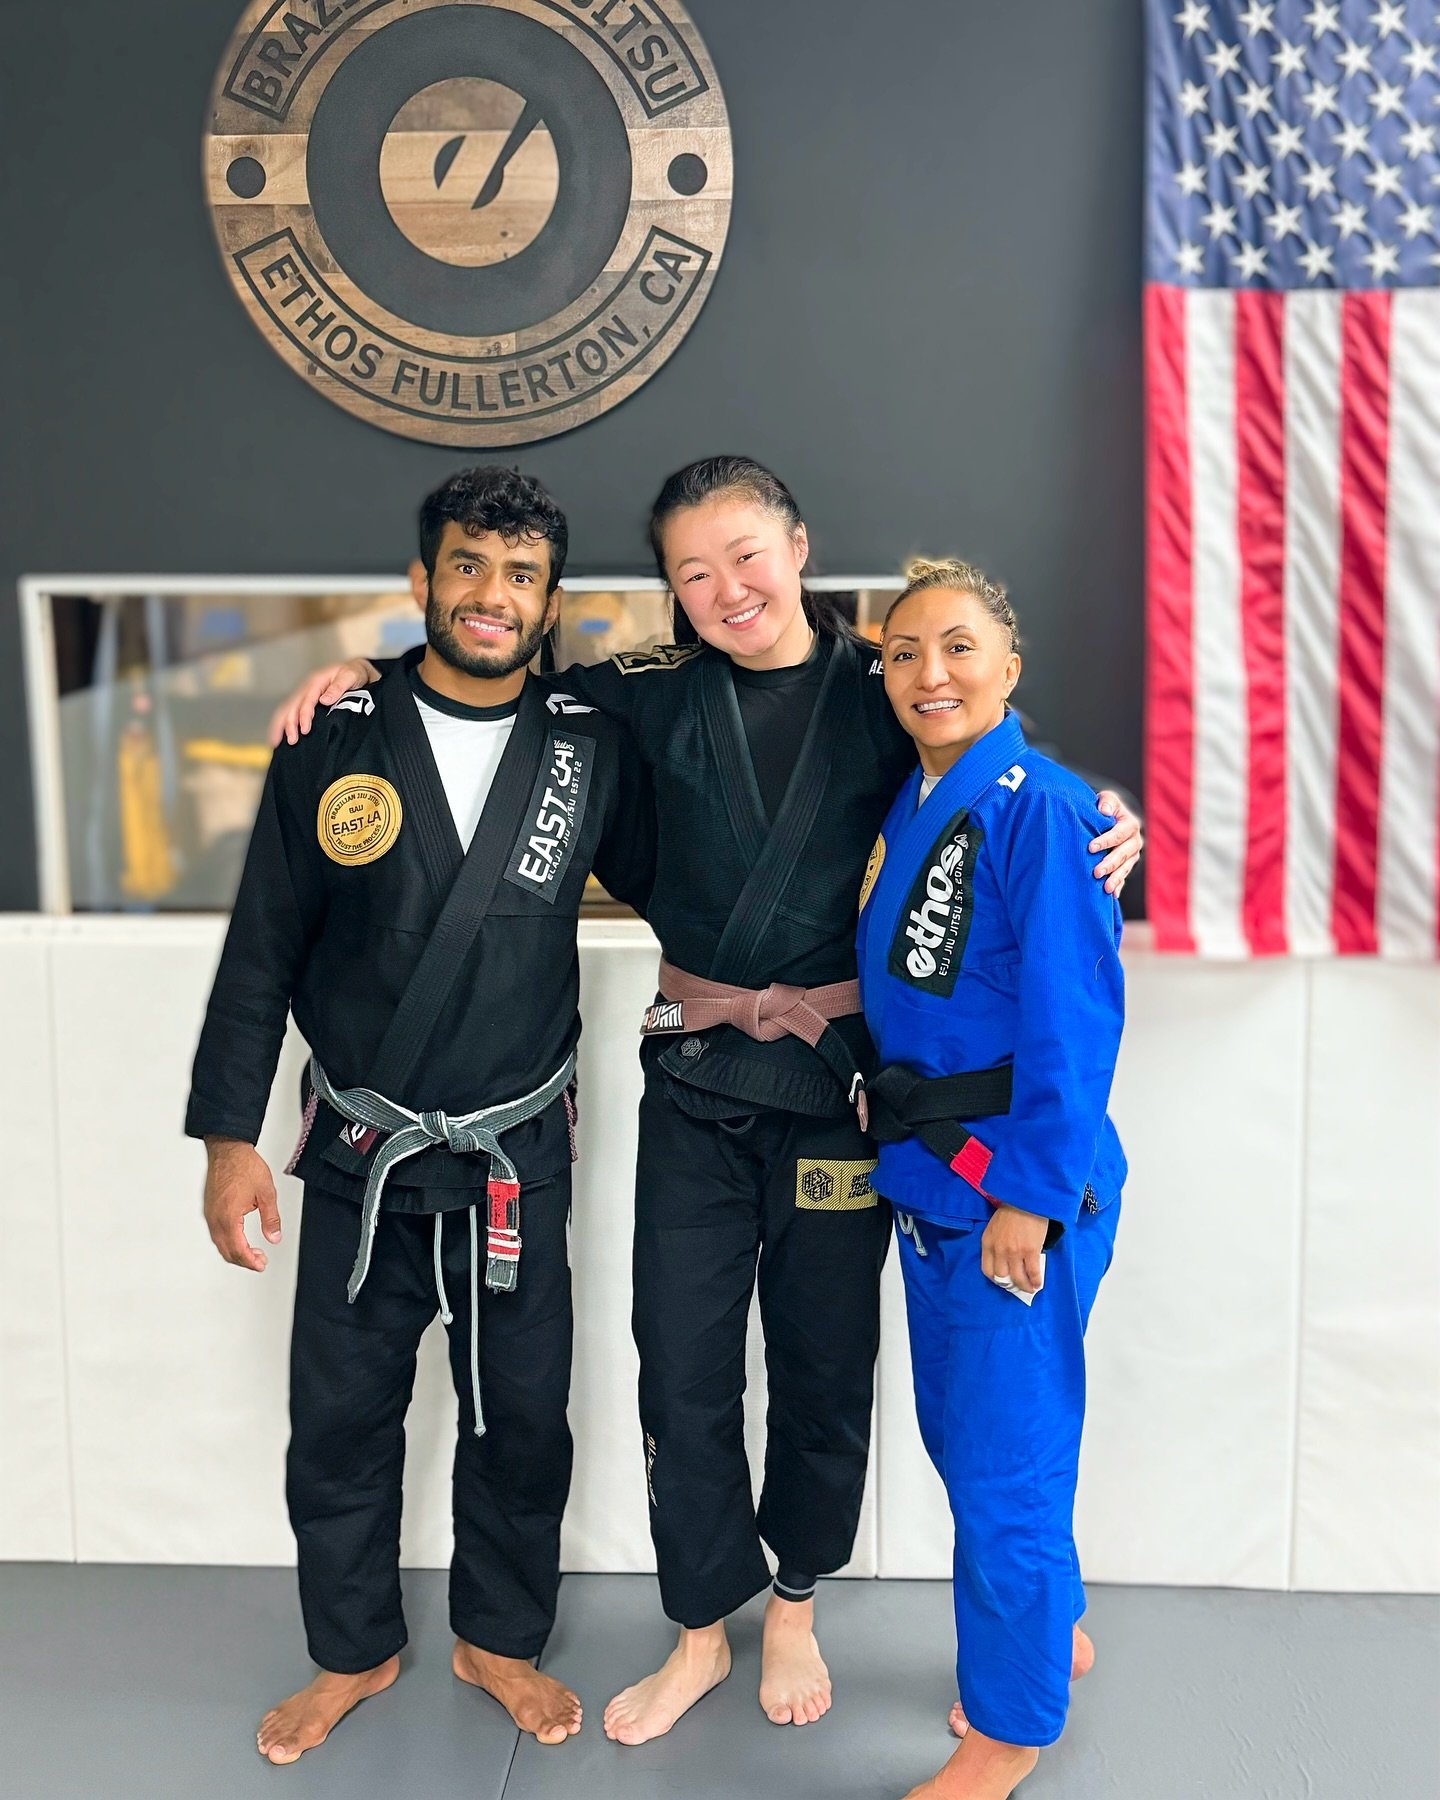 Today was @nina_bjj_kz last official day with us 😢 We are going to miss you so very much. You&rsquo;ve been a good friend for some time, and we will miss your company but we will also miss the steady competition training with you. See you soon, save